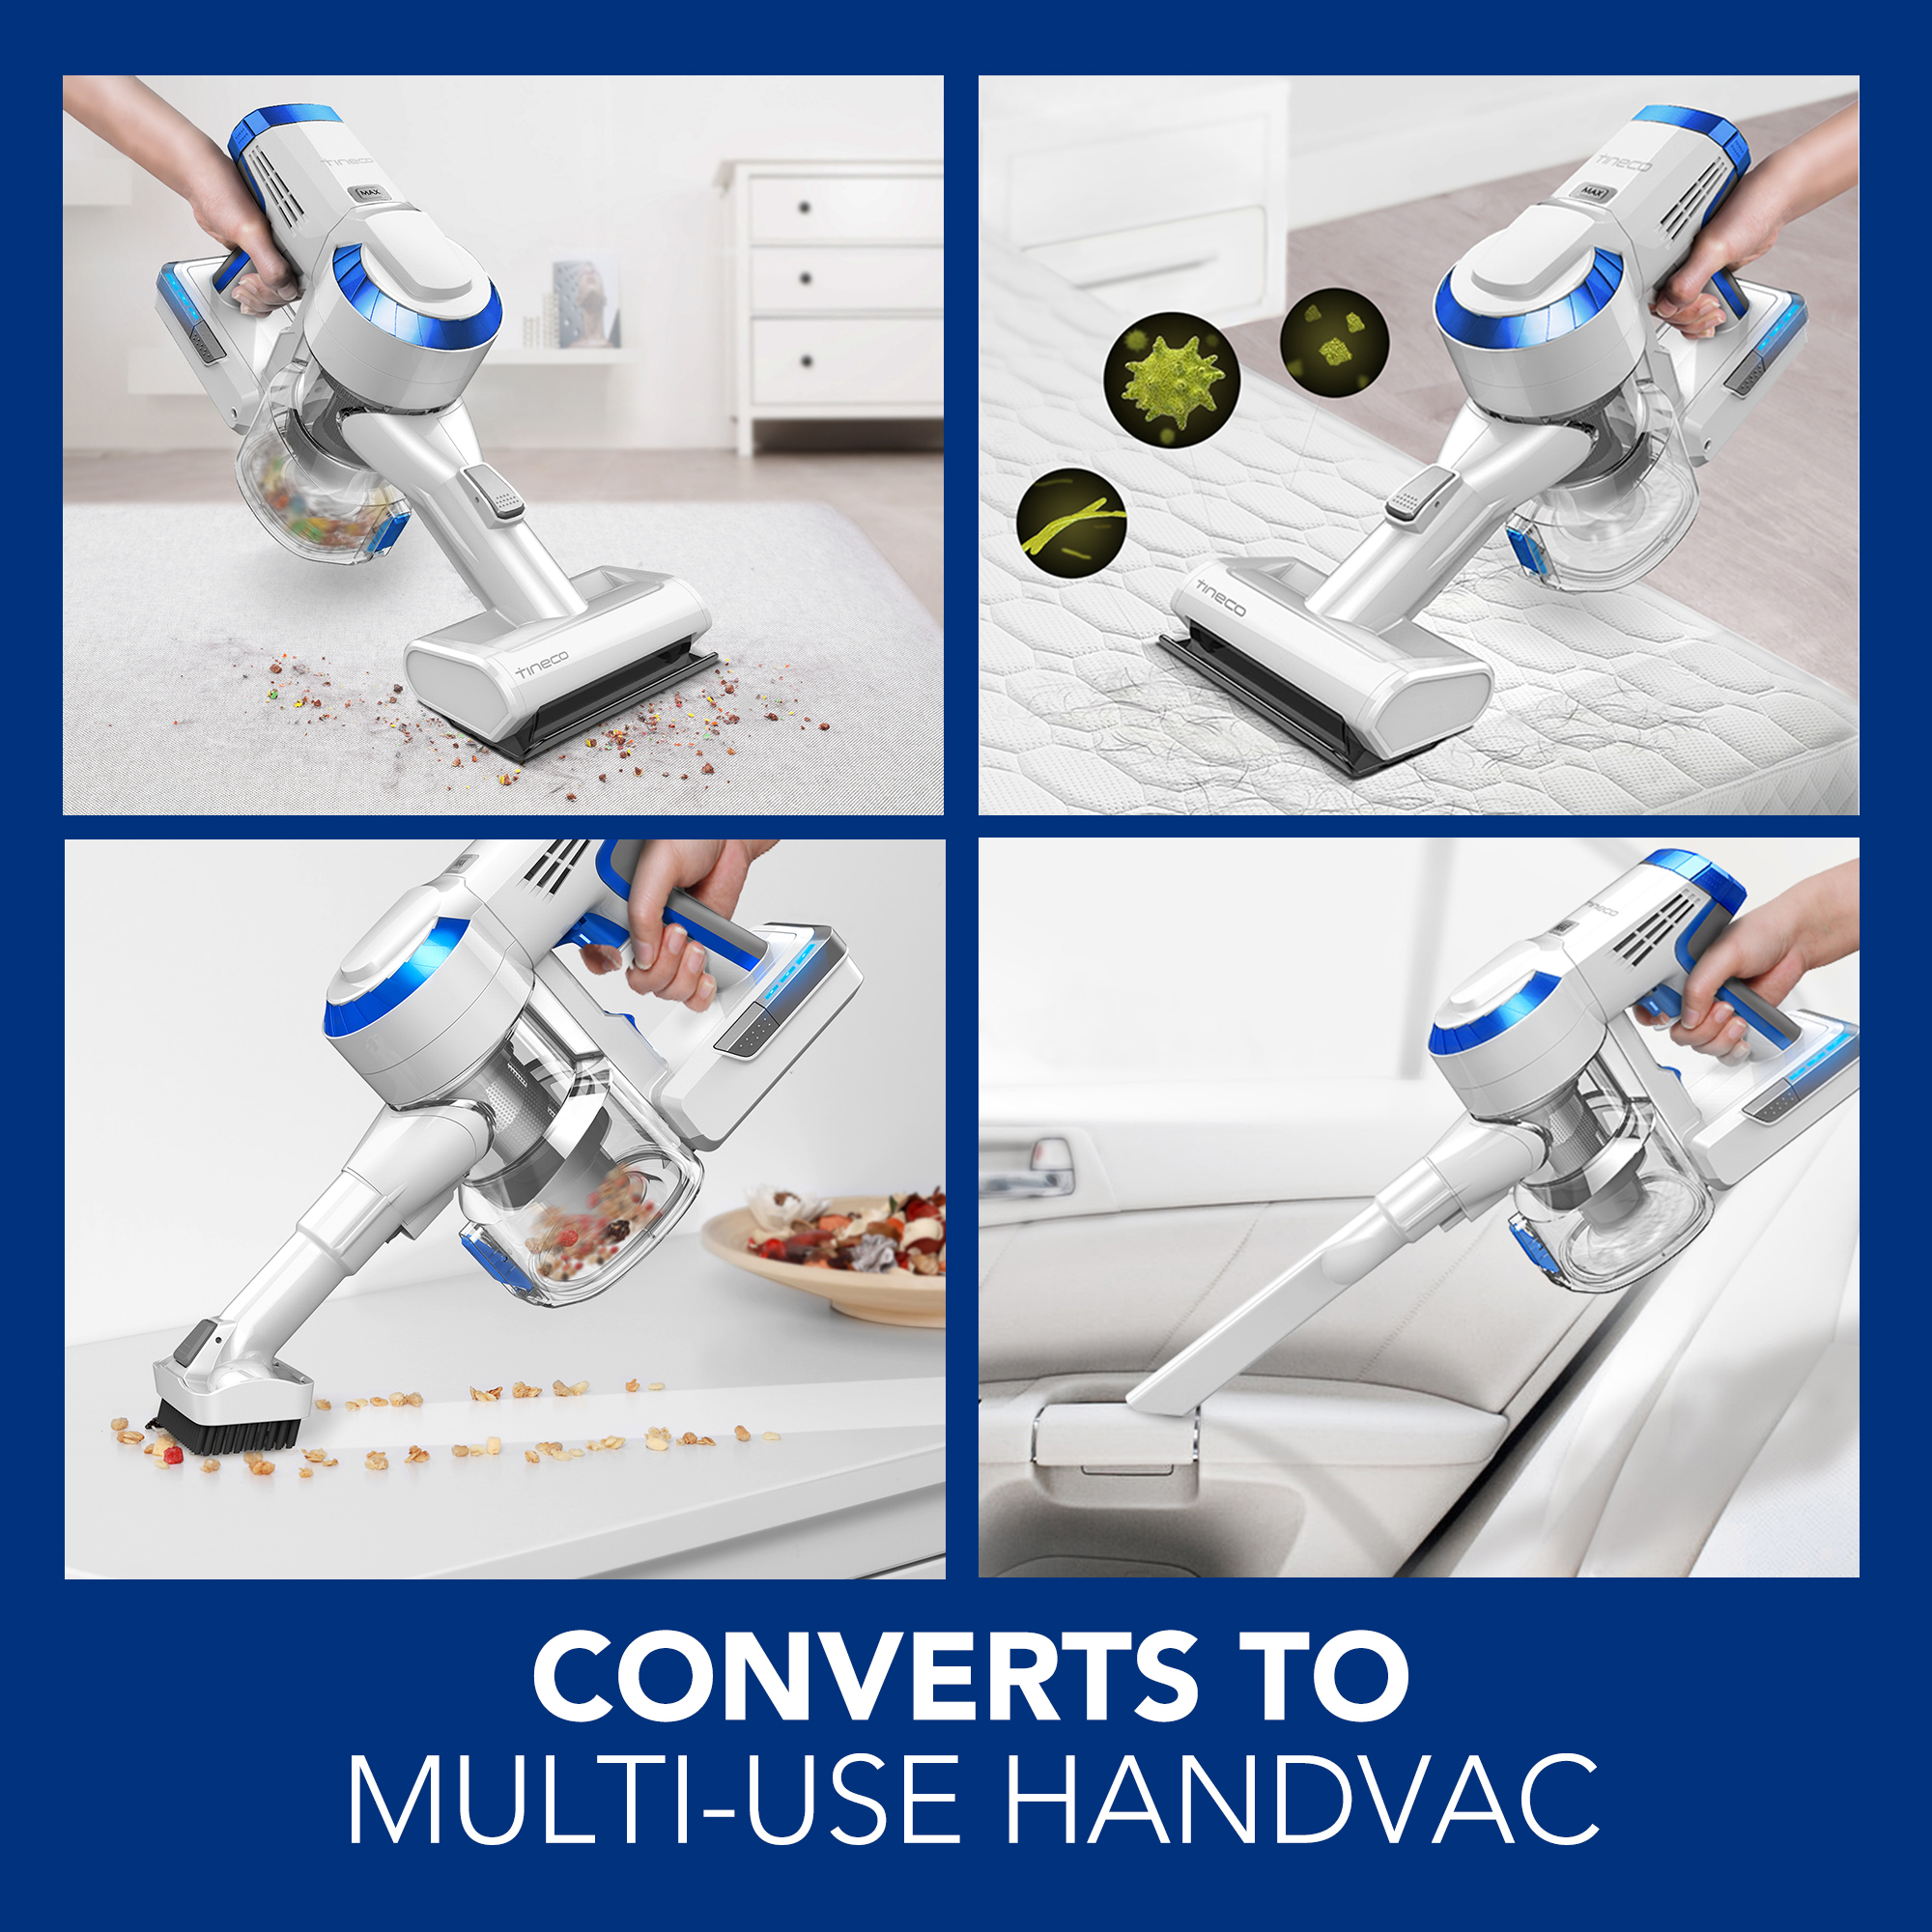 Tineco A10 Hero Lightweight Cordless Stick Vacuum Cleaner - image 4 of 6